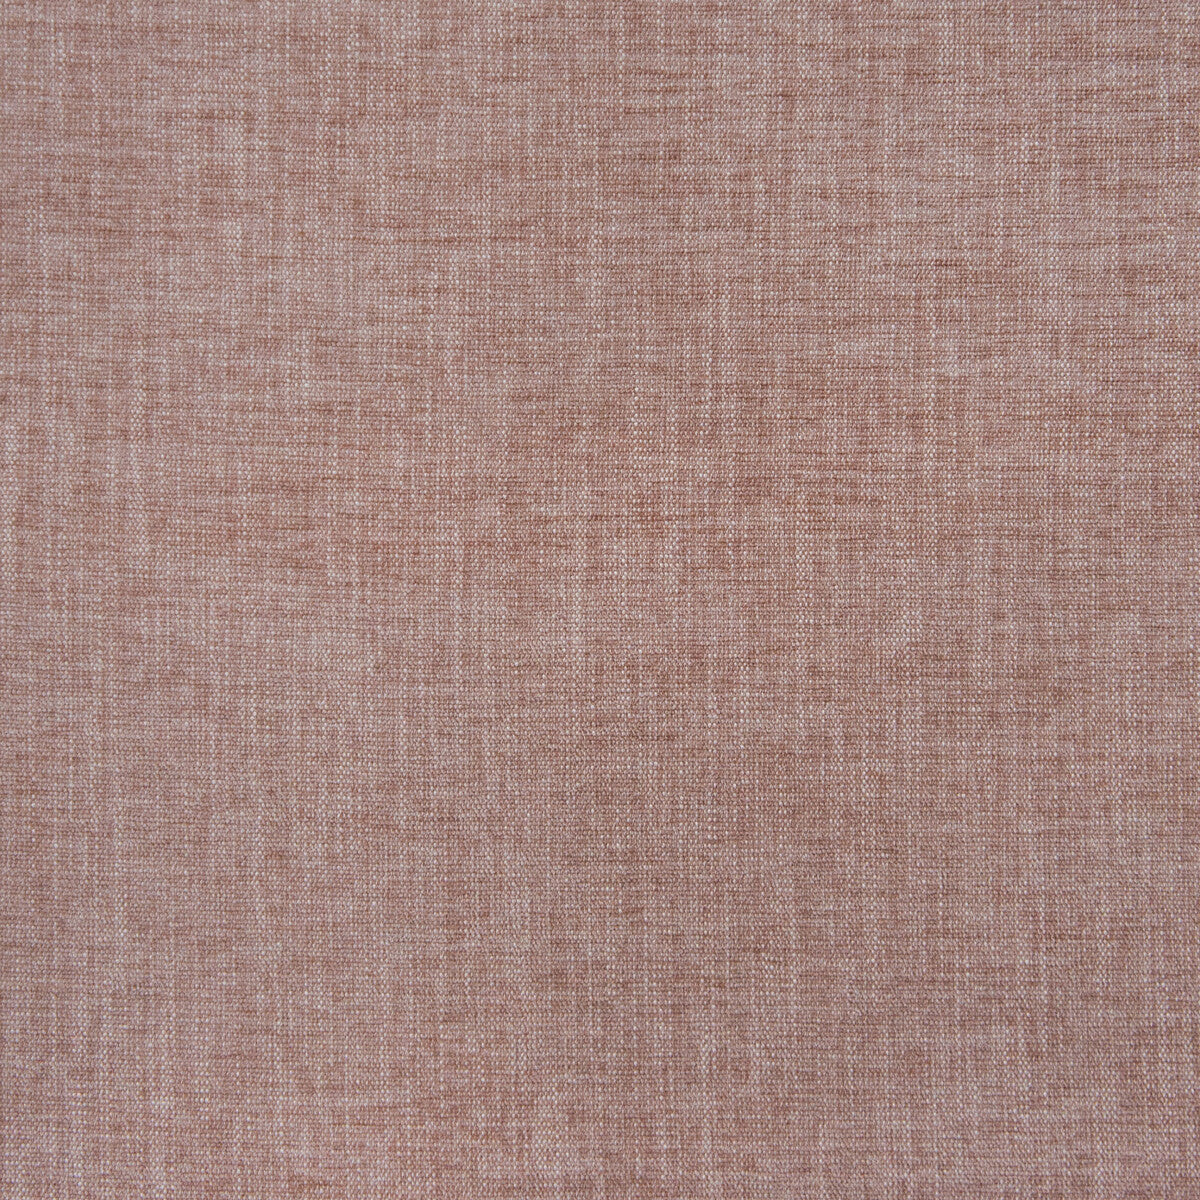 Moro fabric in rosa viejo color - pattern GDT5670.016.0 - by Gaston y Daniela in the Gaston Maiorica collection